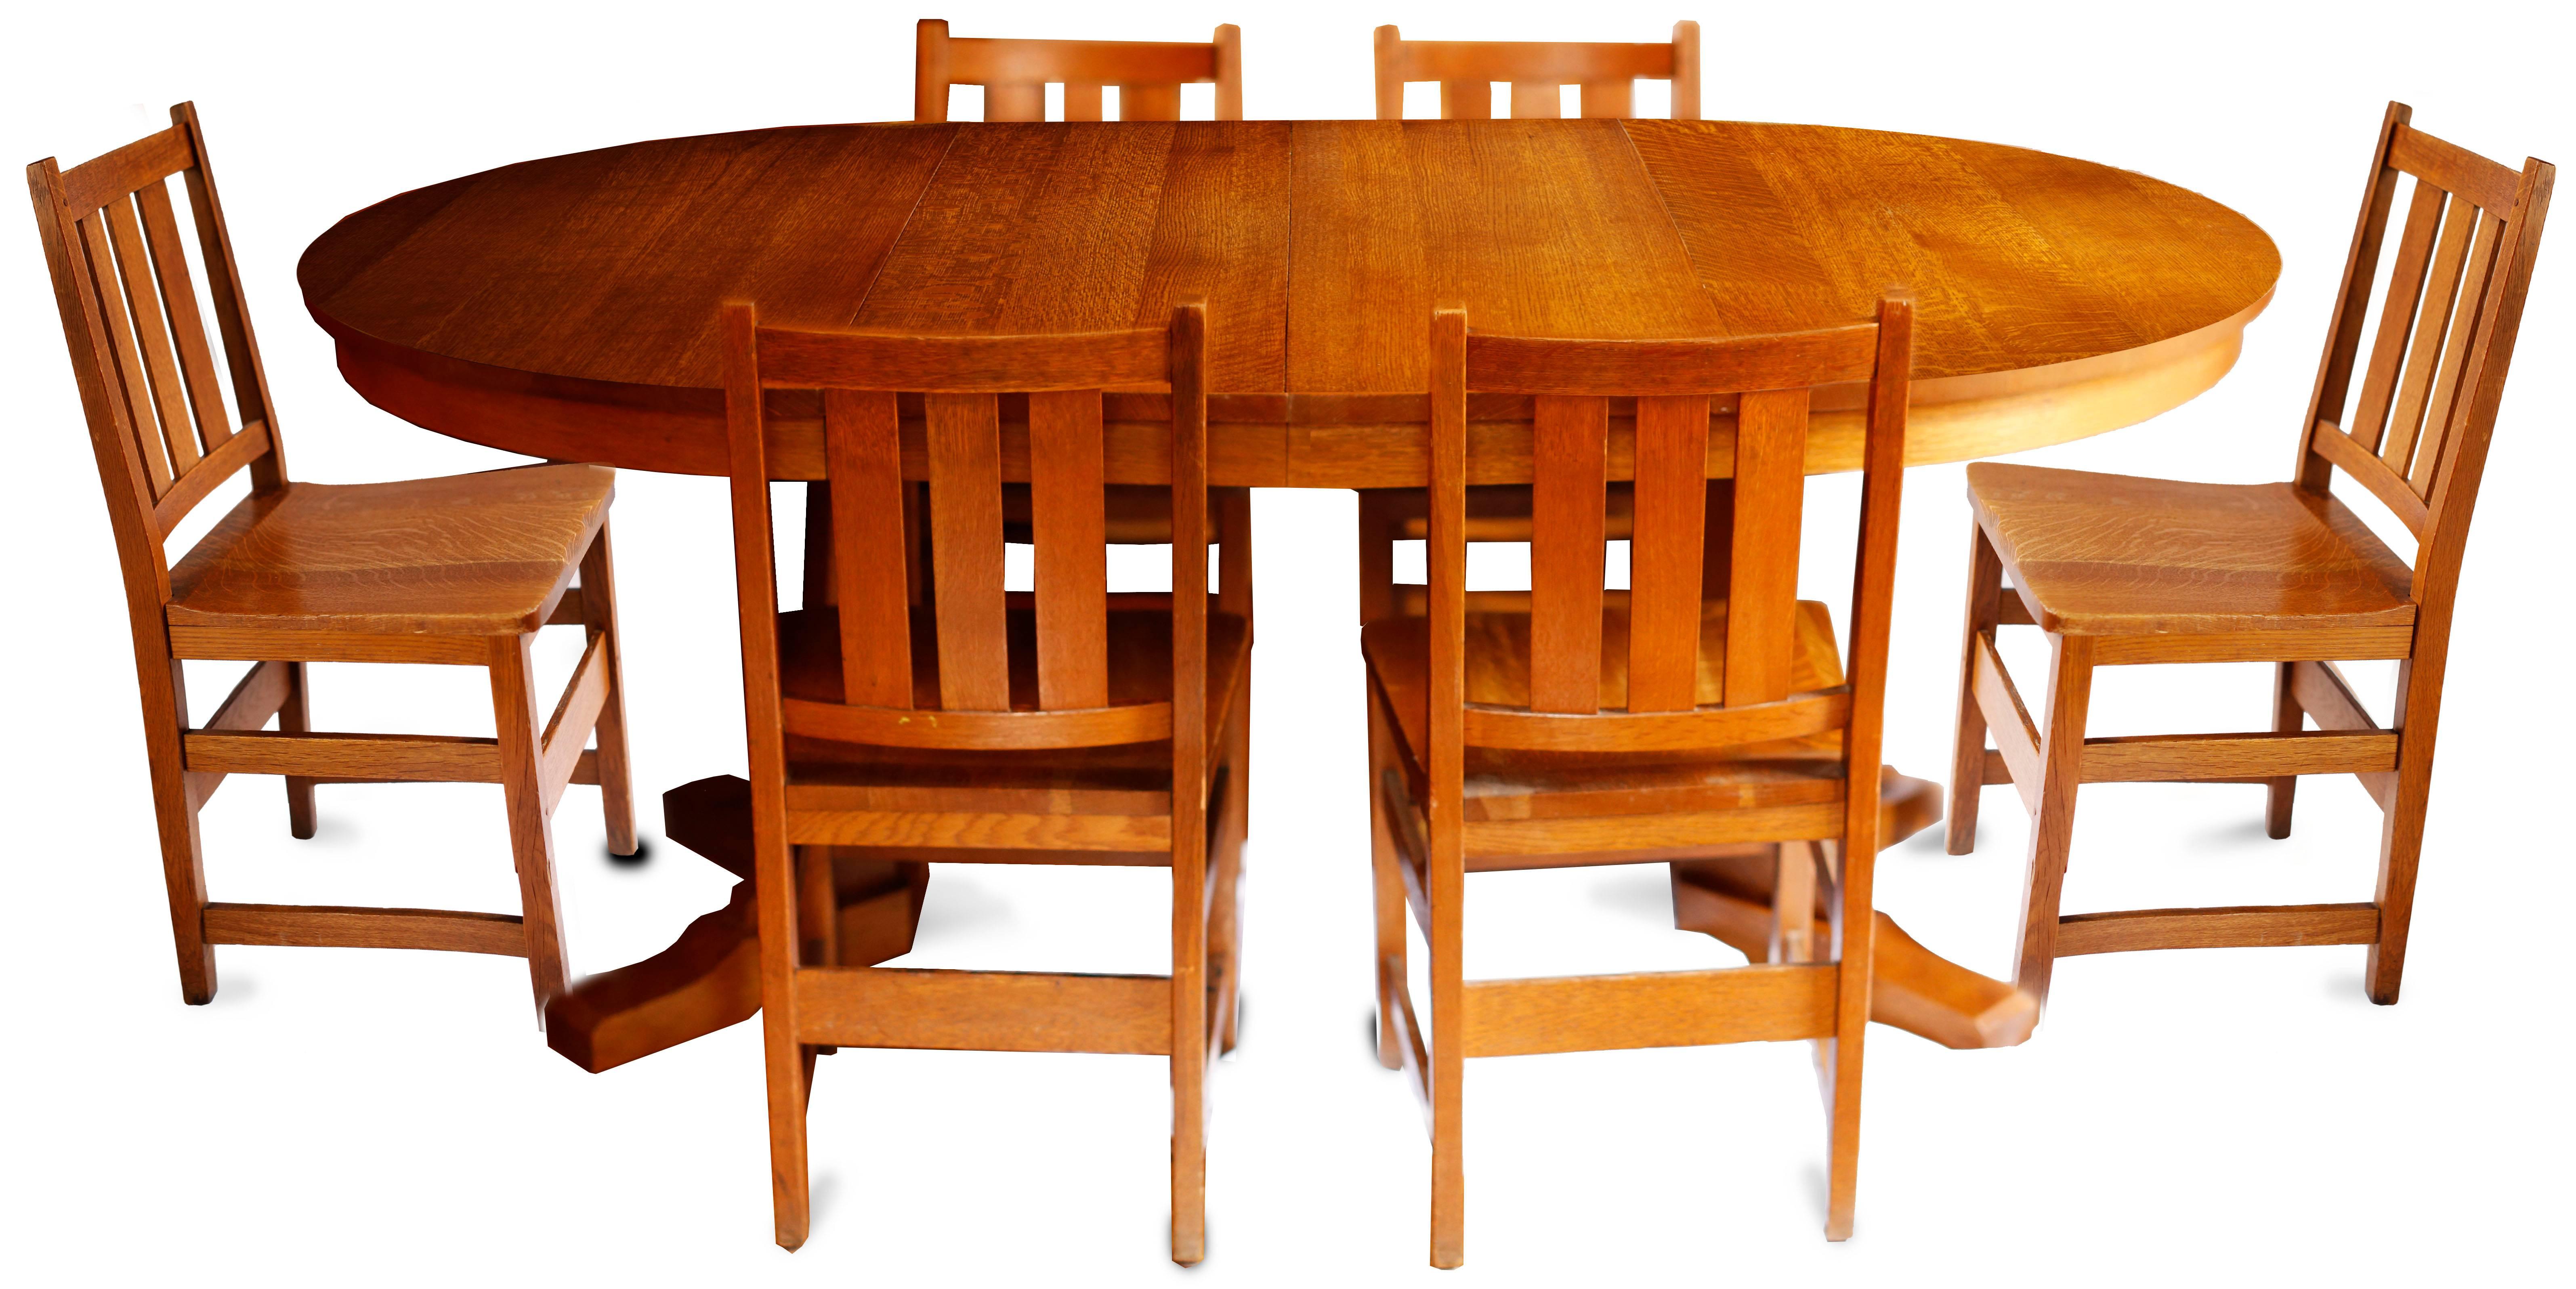 American Andy Warhol's 6 Stickley Chairs from the Factory and Contemporary Stickley Table